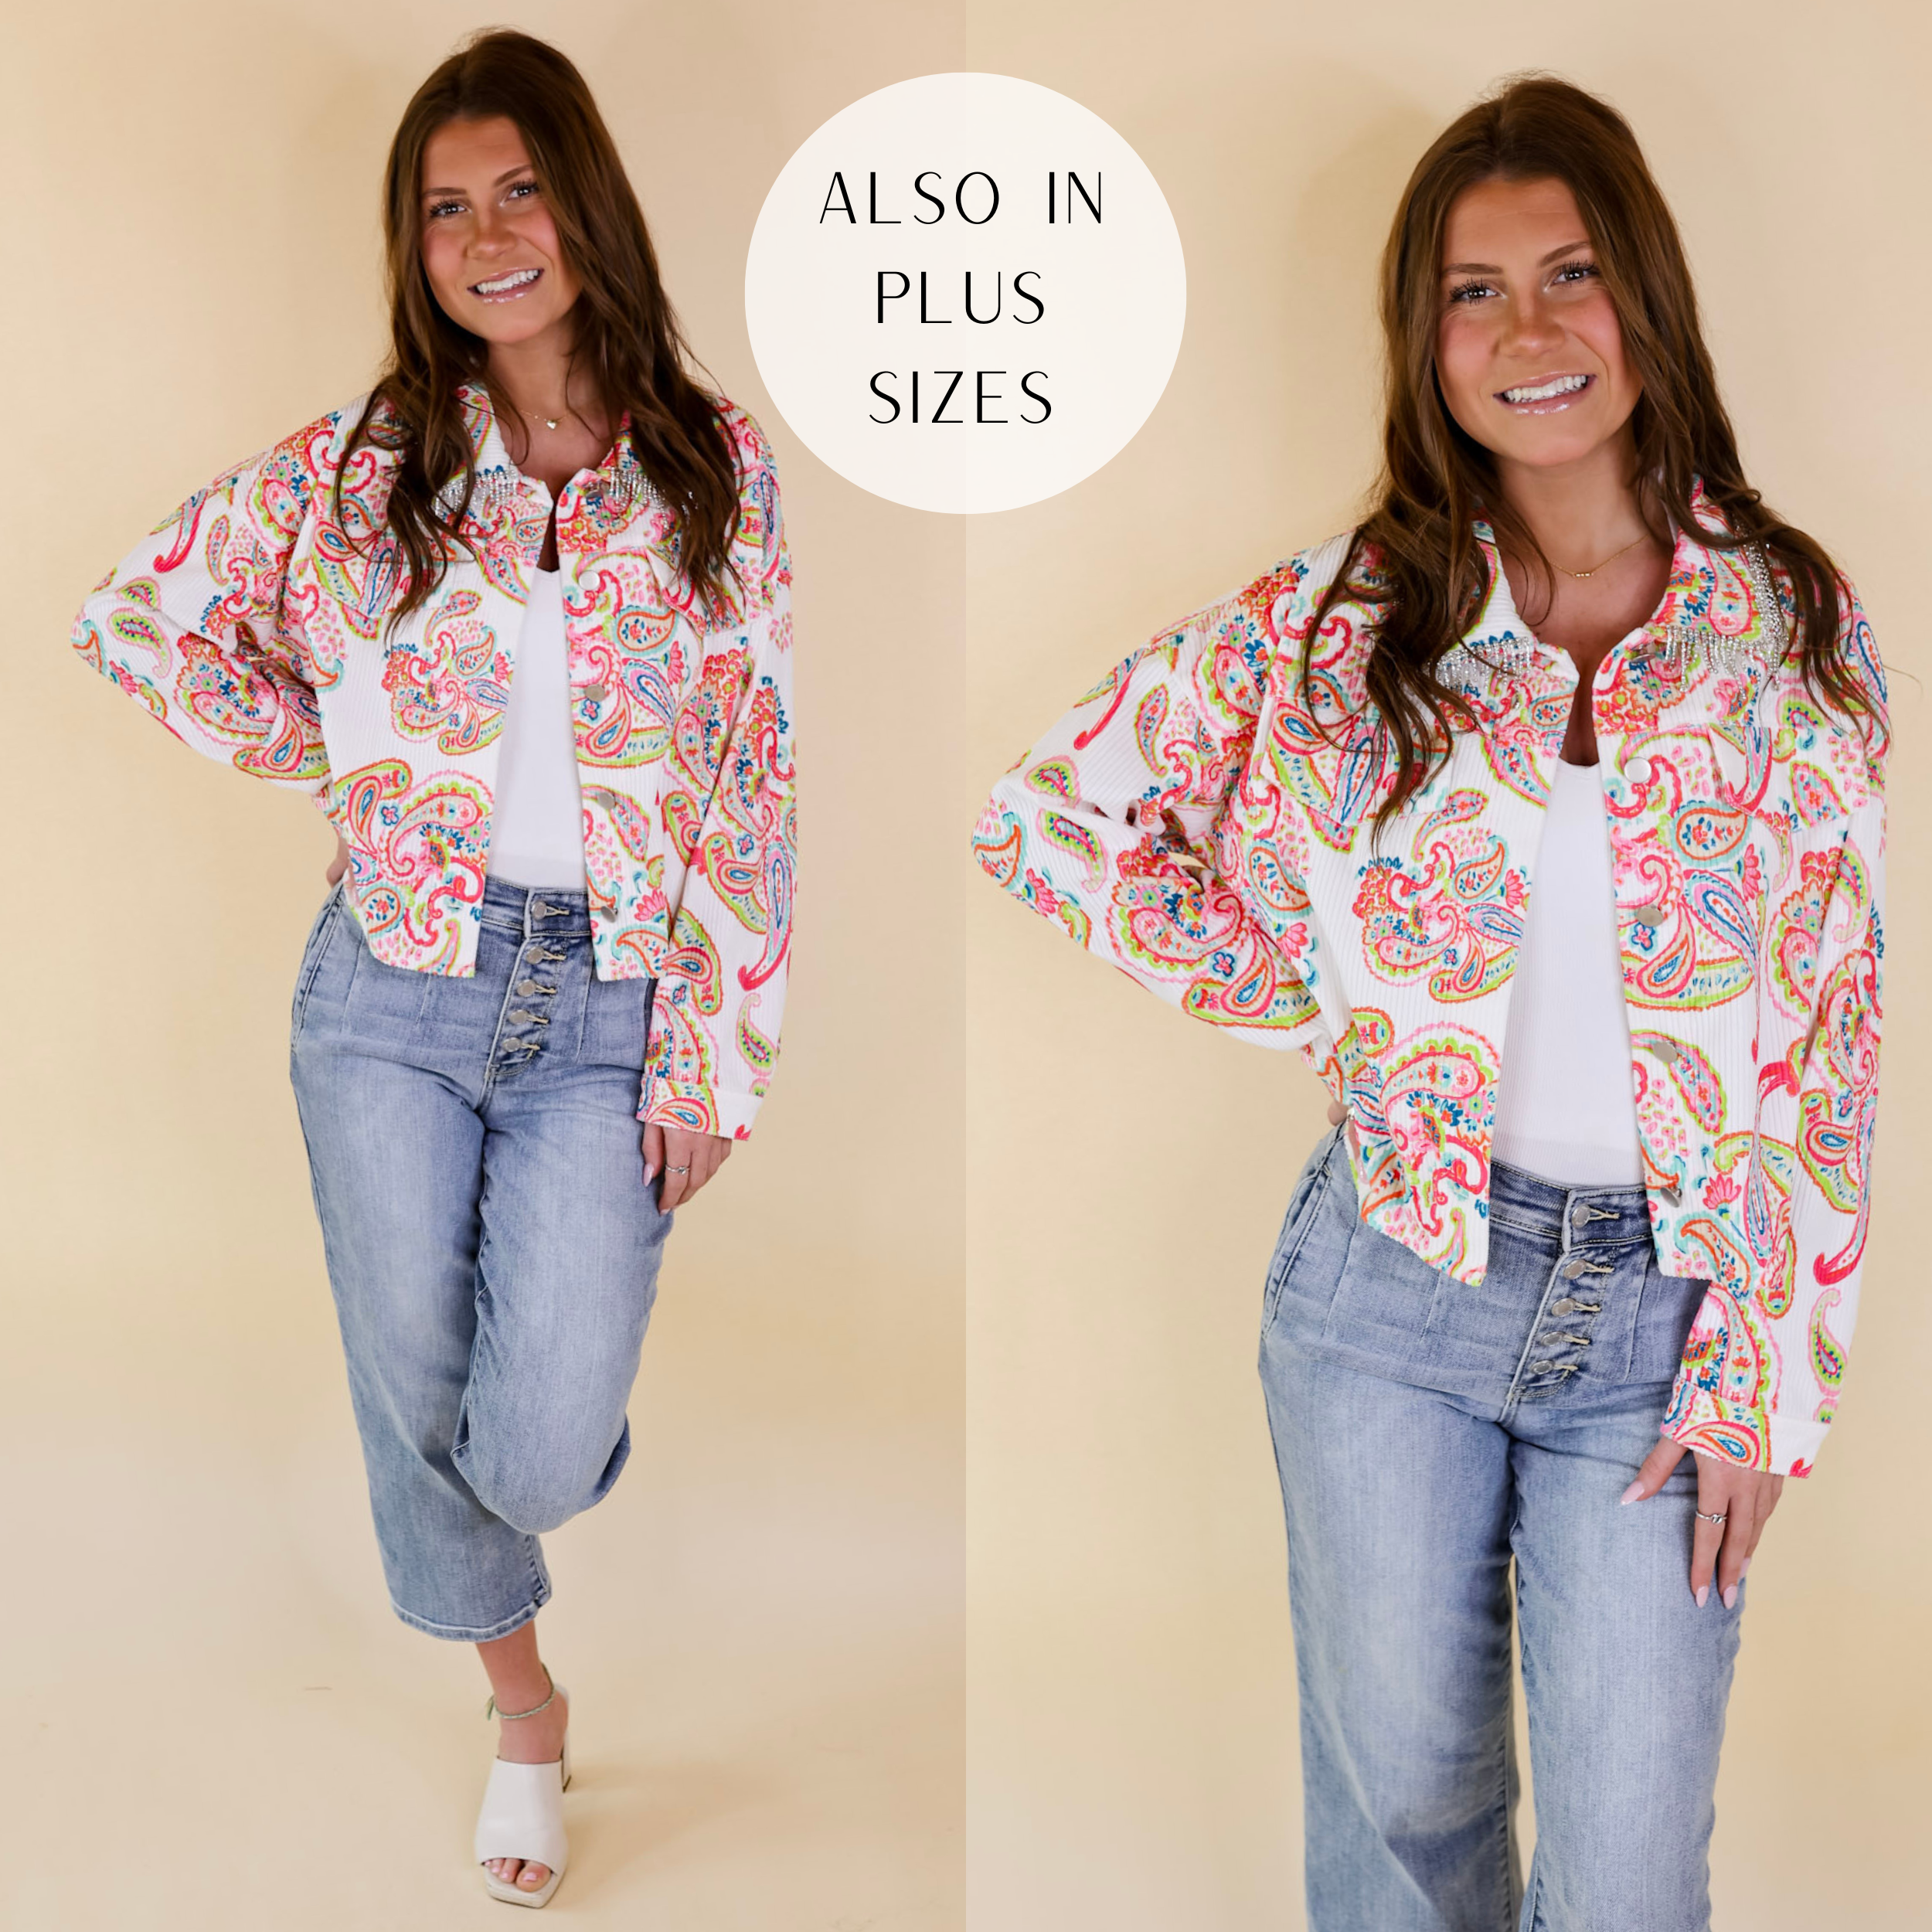 Model is wearing a button up jacket with crystal fringe around the collar and a neon green, pink, and blue paisley print. Model has this jacket on over a white tank top, cropped jeans, ivory heels, and gold jewelry.